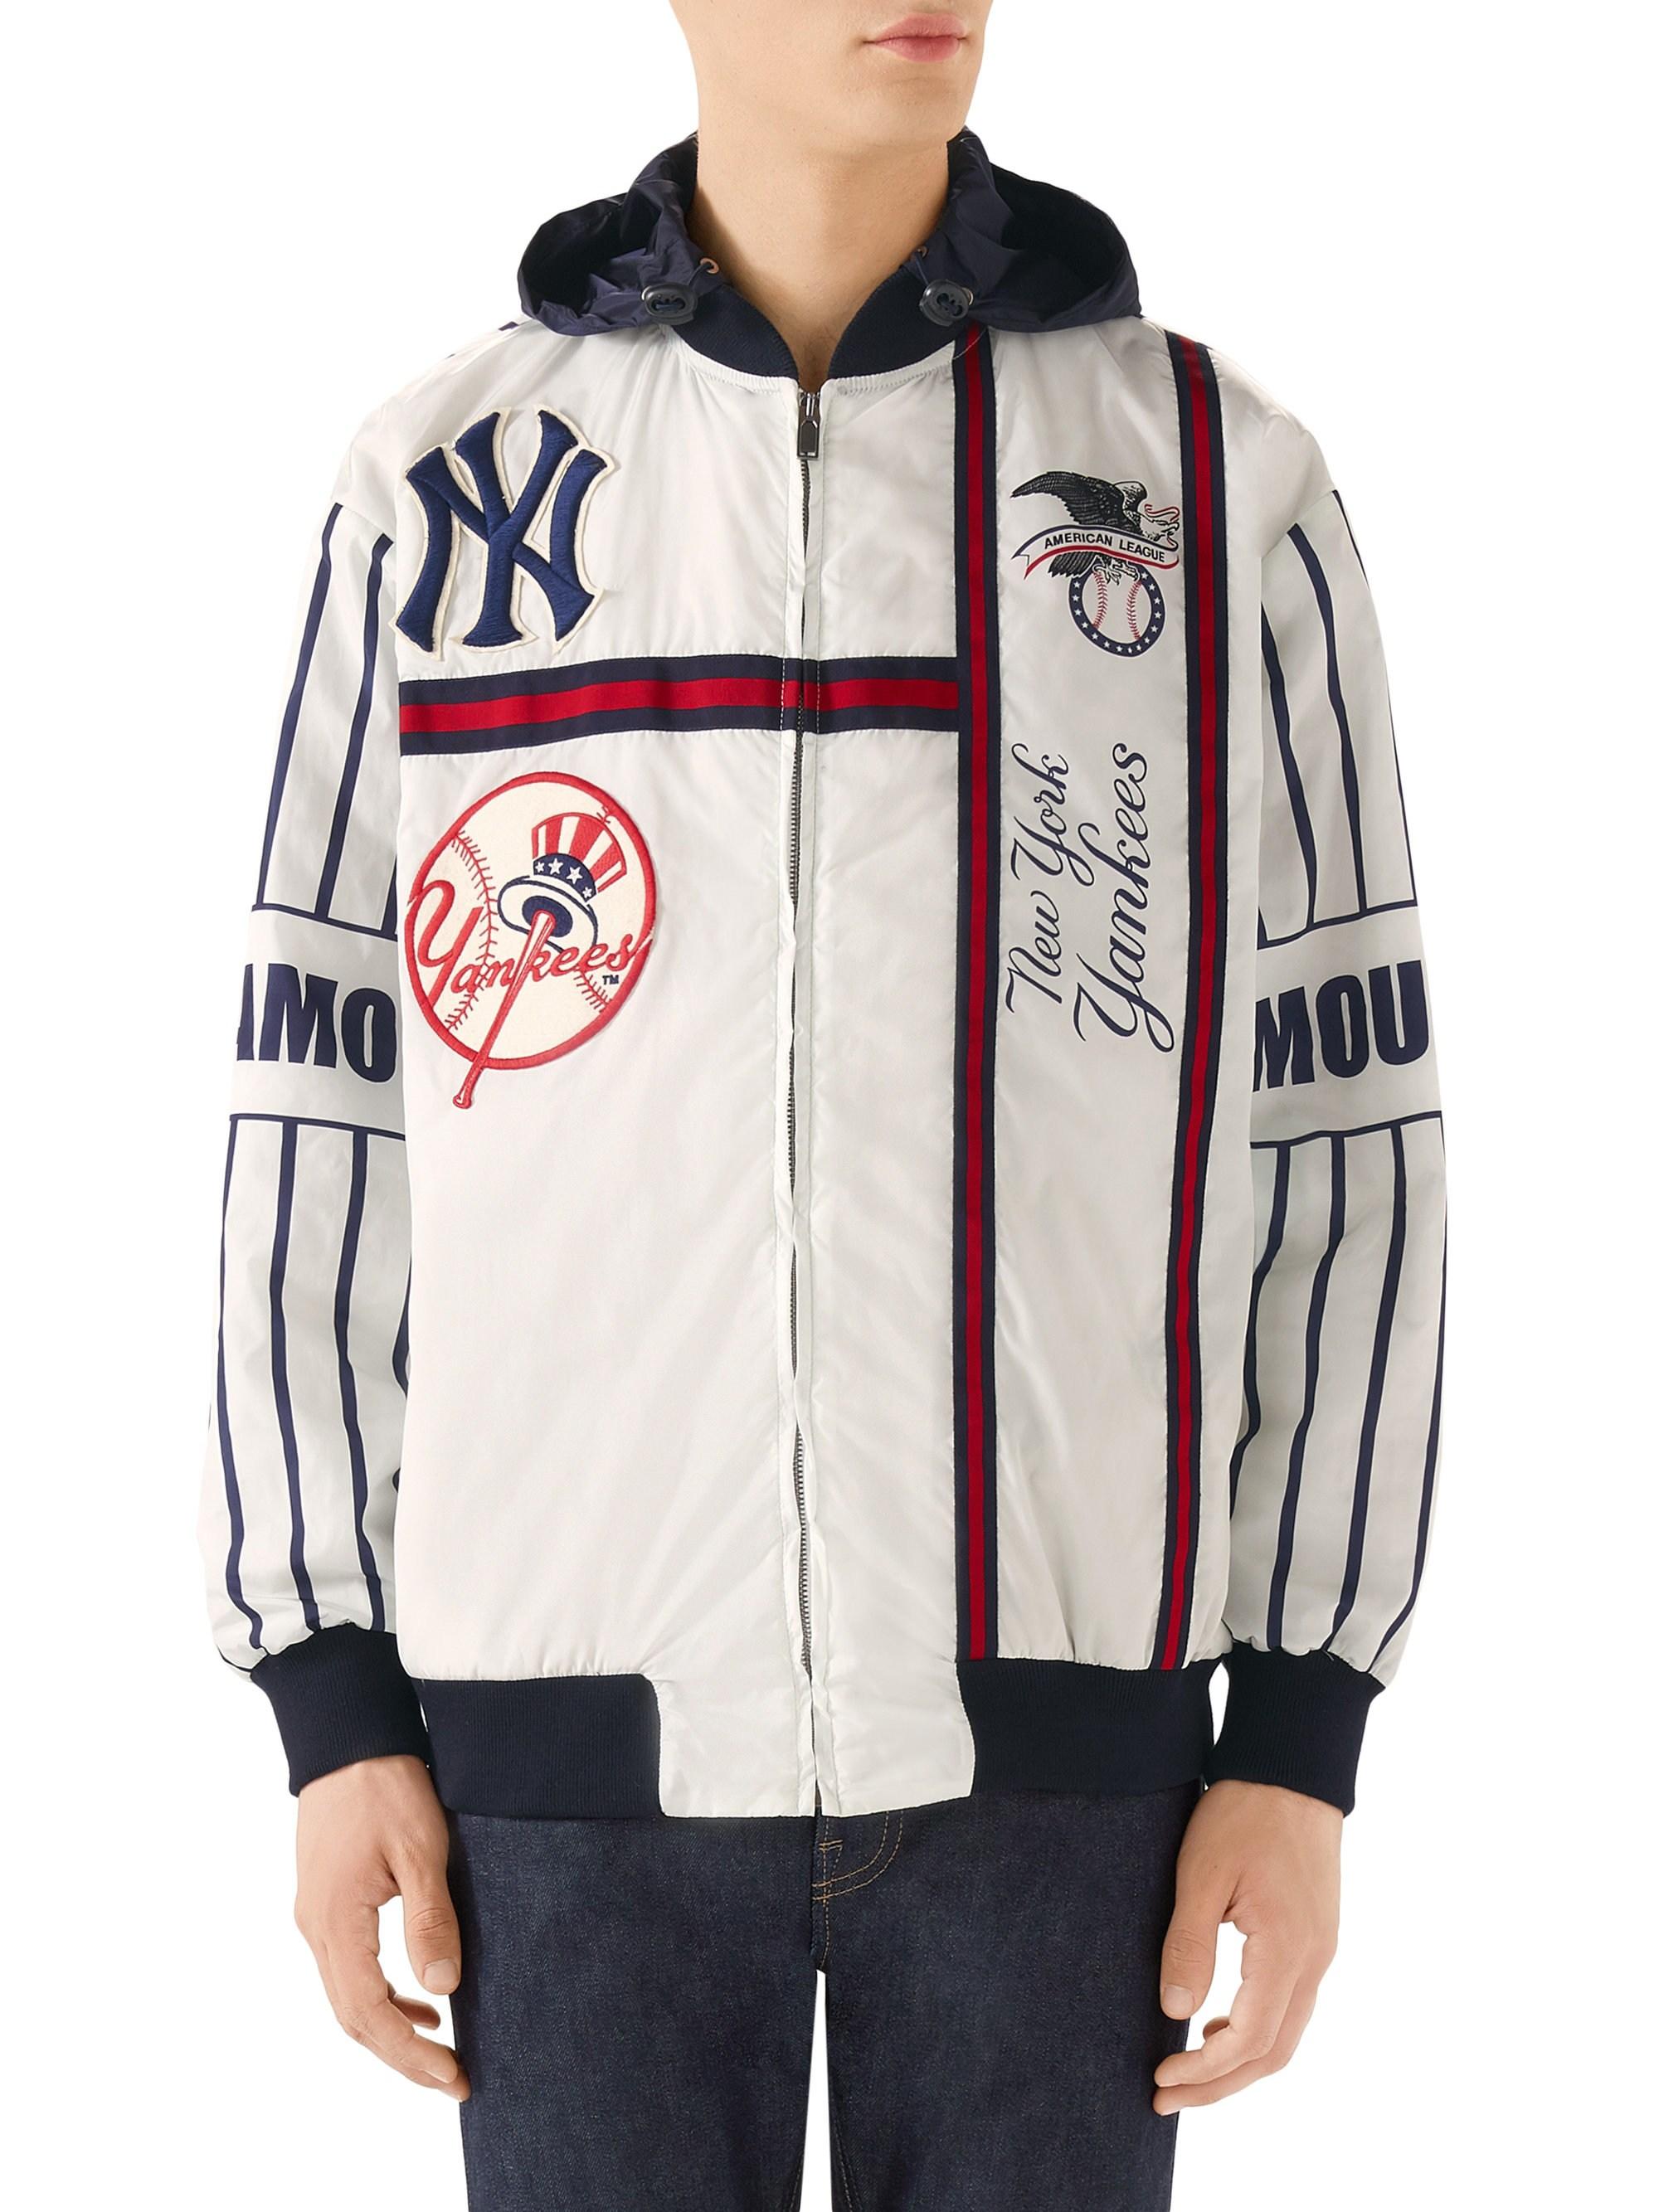 Gucci Jacket With NY Yankees™ Patch - Farfetch